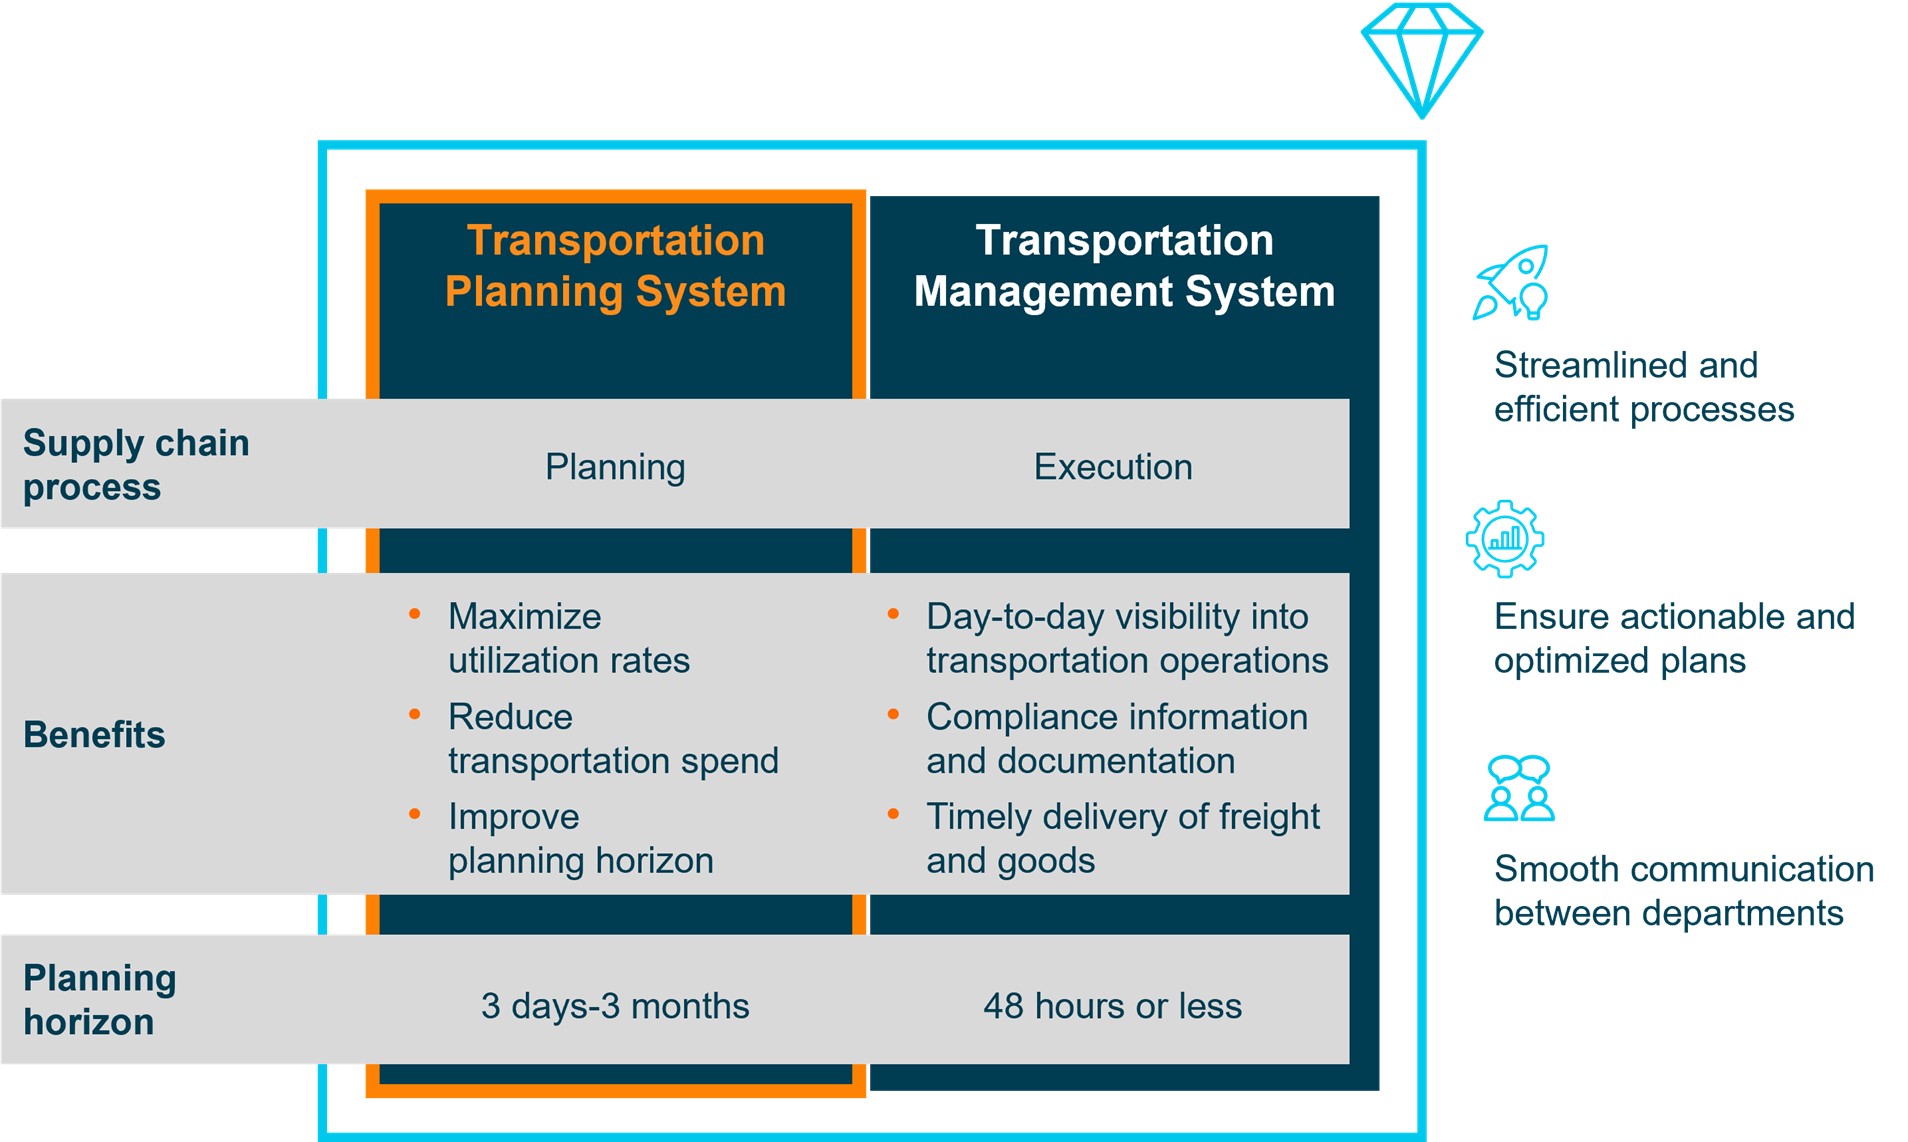 Graphic table showing differences between transportation planning and transportation management processes